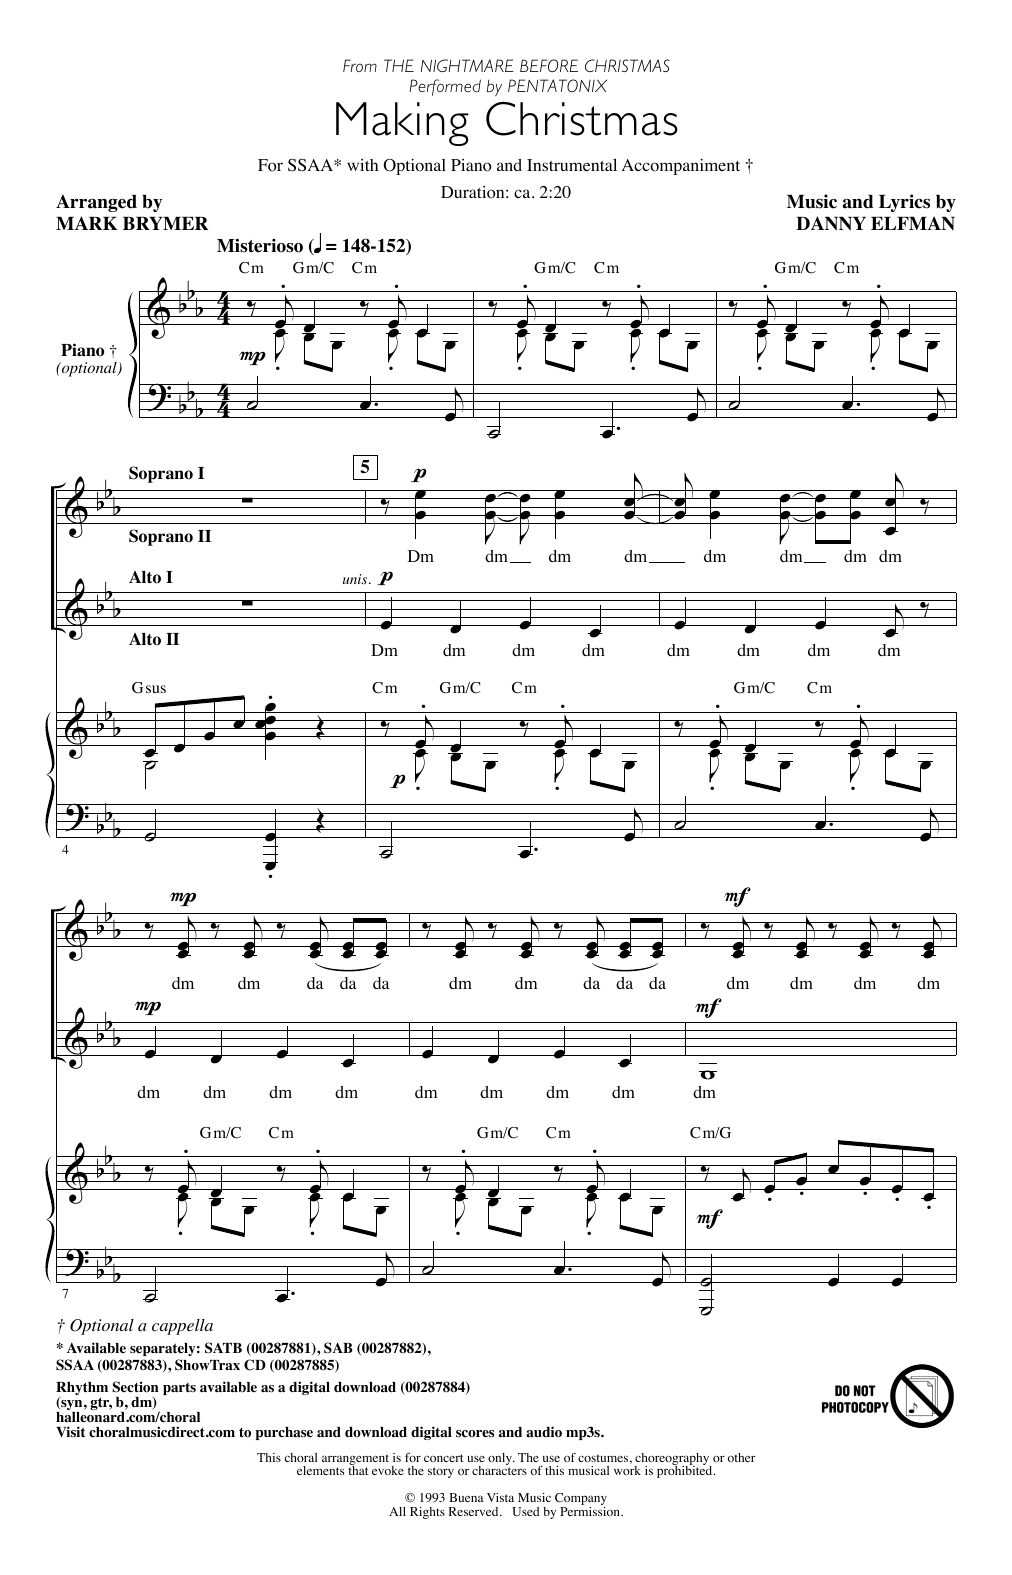 Download Pentatonix Making Christmas (from The Nightmare Be Sheet Music